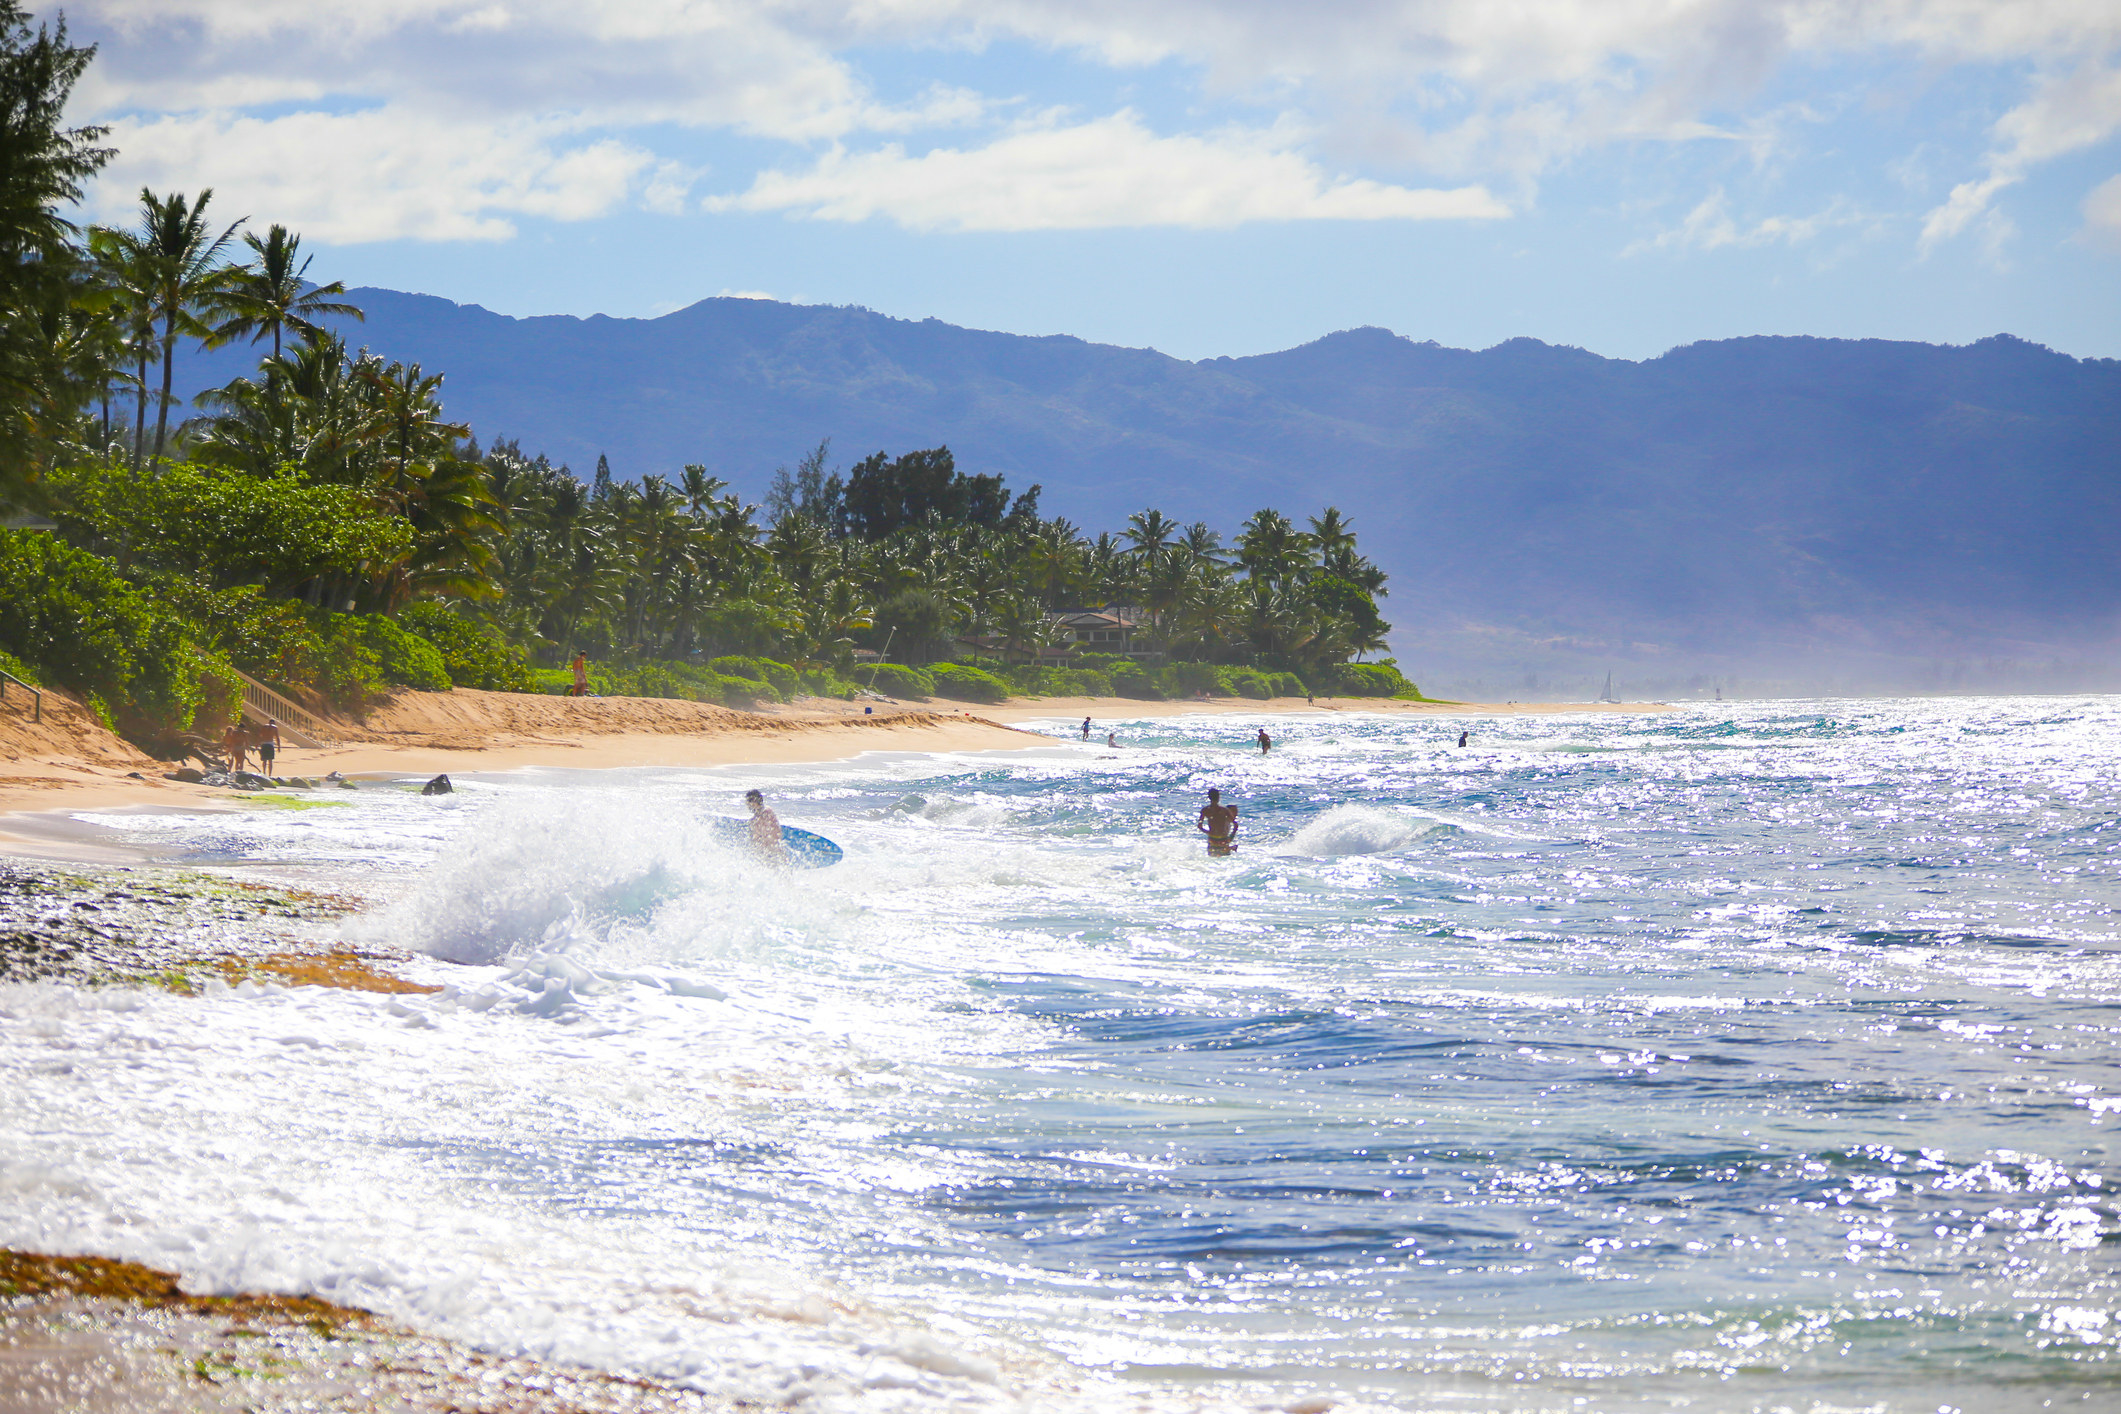 Surfers at the beach in North Shore, Oahu.